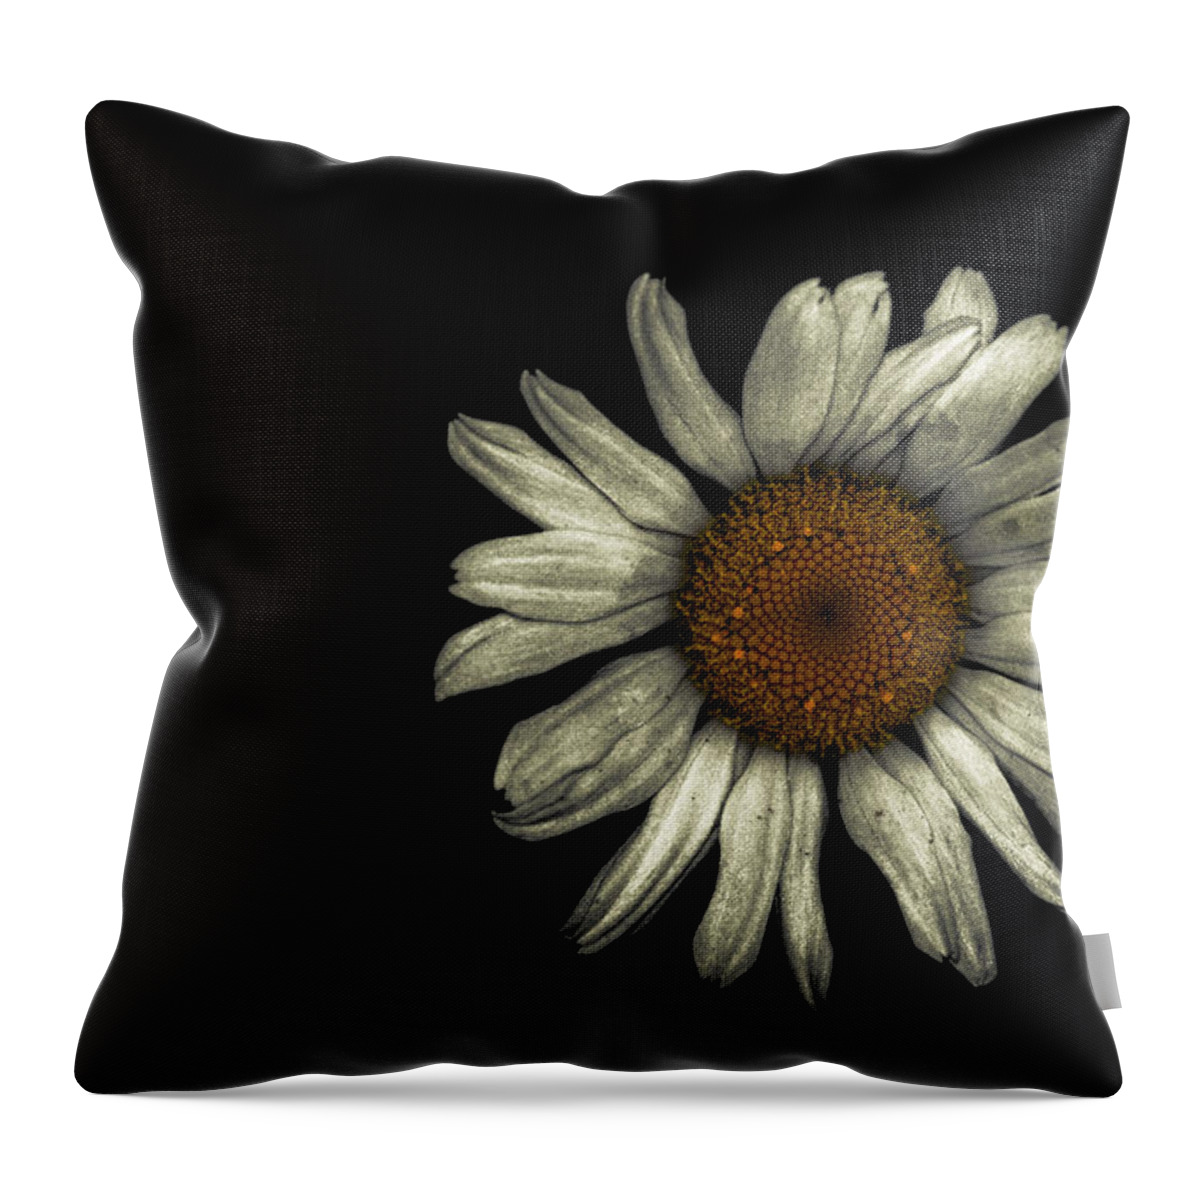 Flower Throw Pillow featuring the photograph Flower Black by Goutham Ganesh